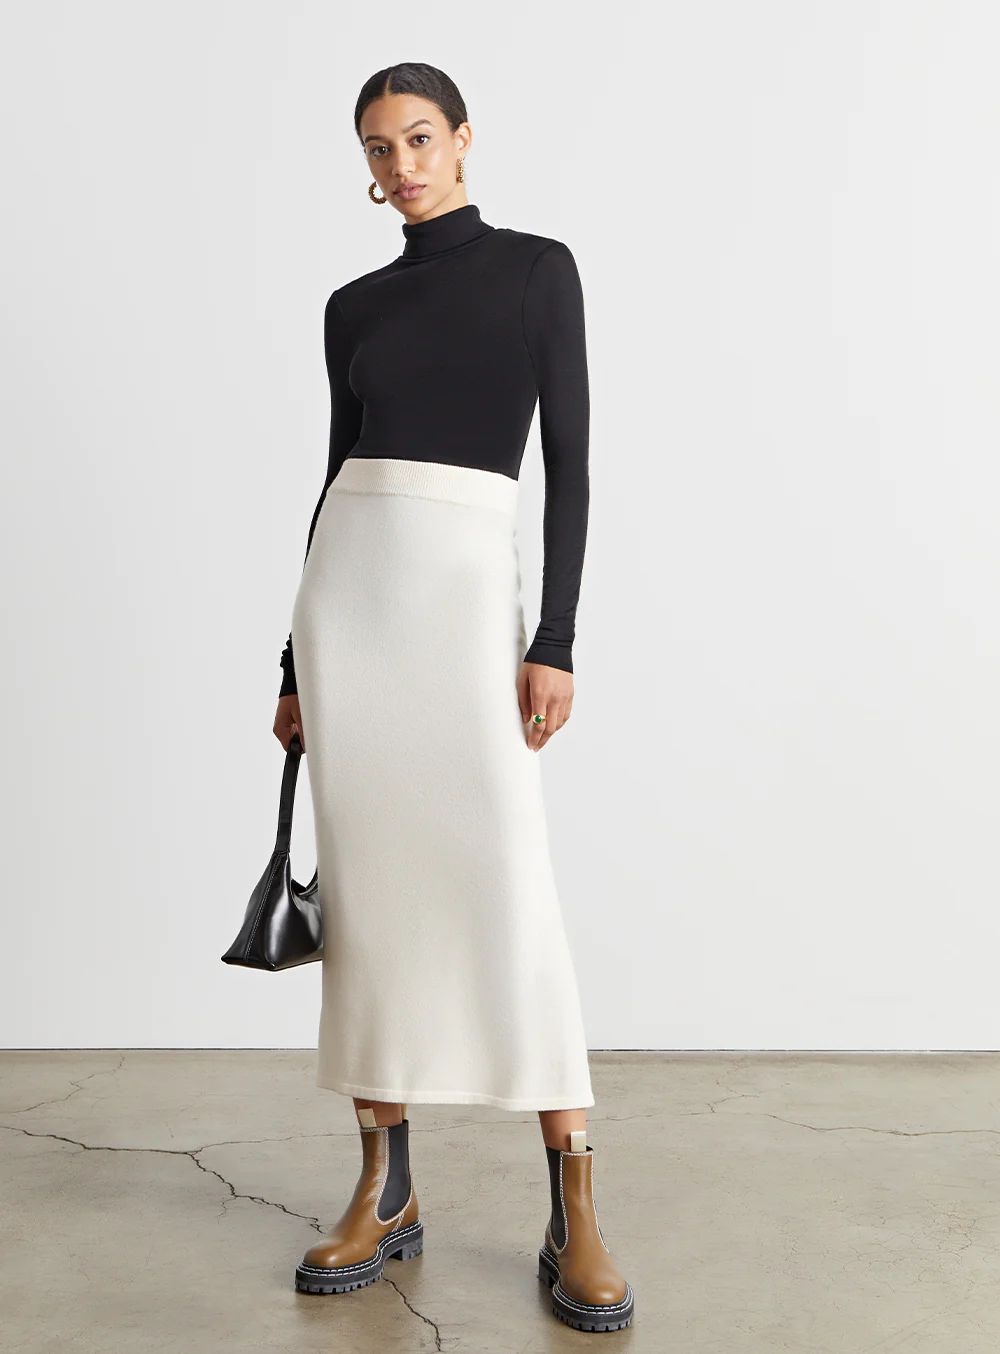 Mollie Knit Midi Skirt | Who What Wear Collection